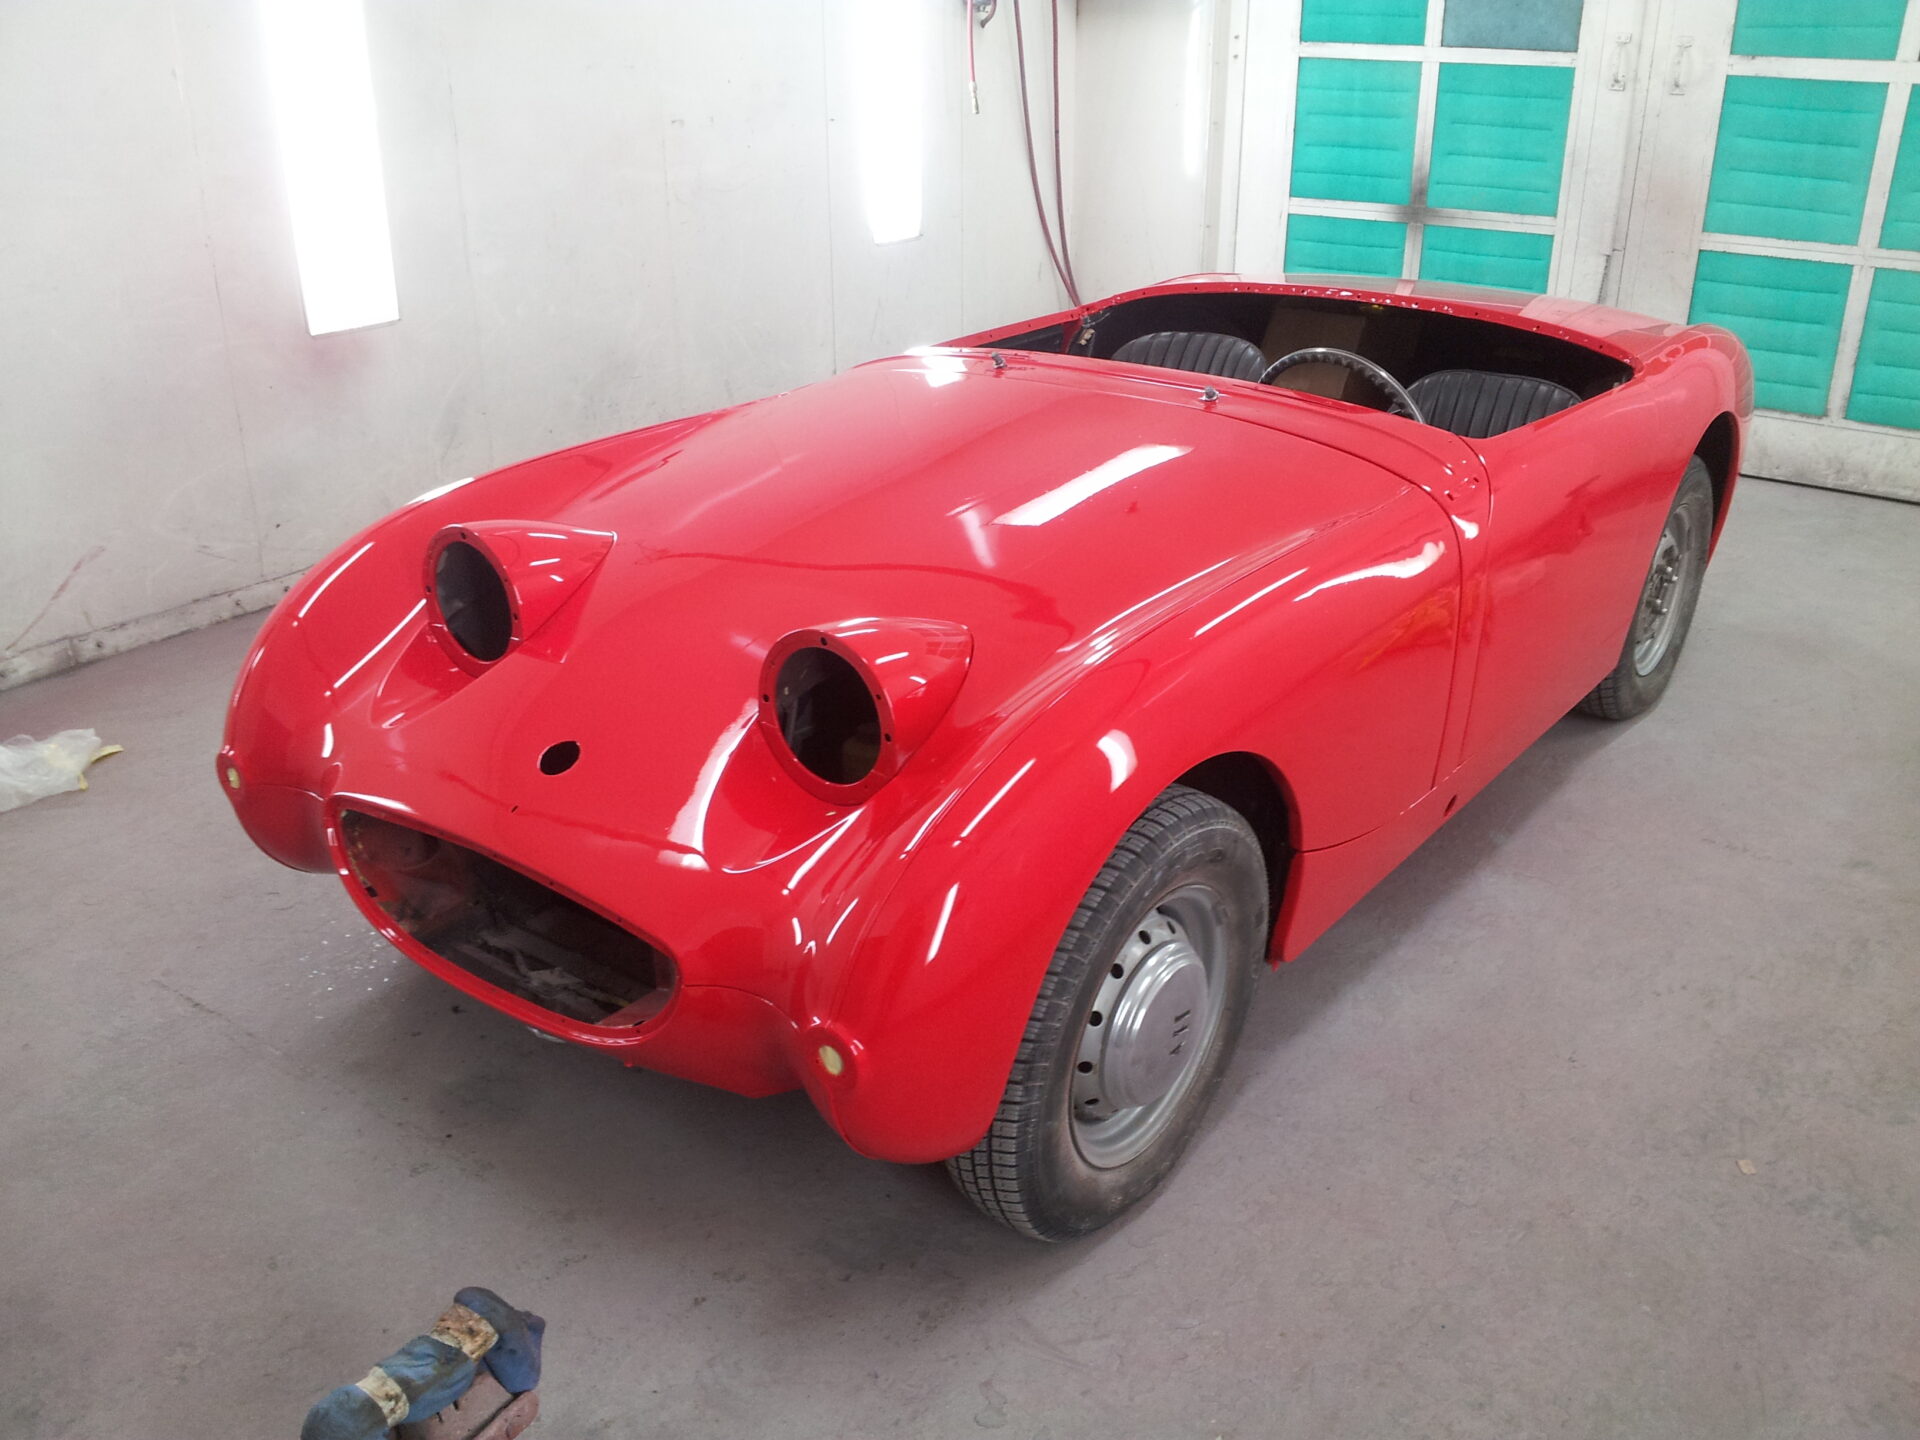 A newly painted 1959 Austin Healey